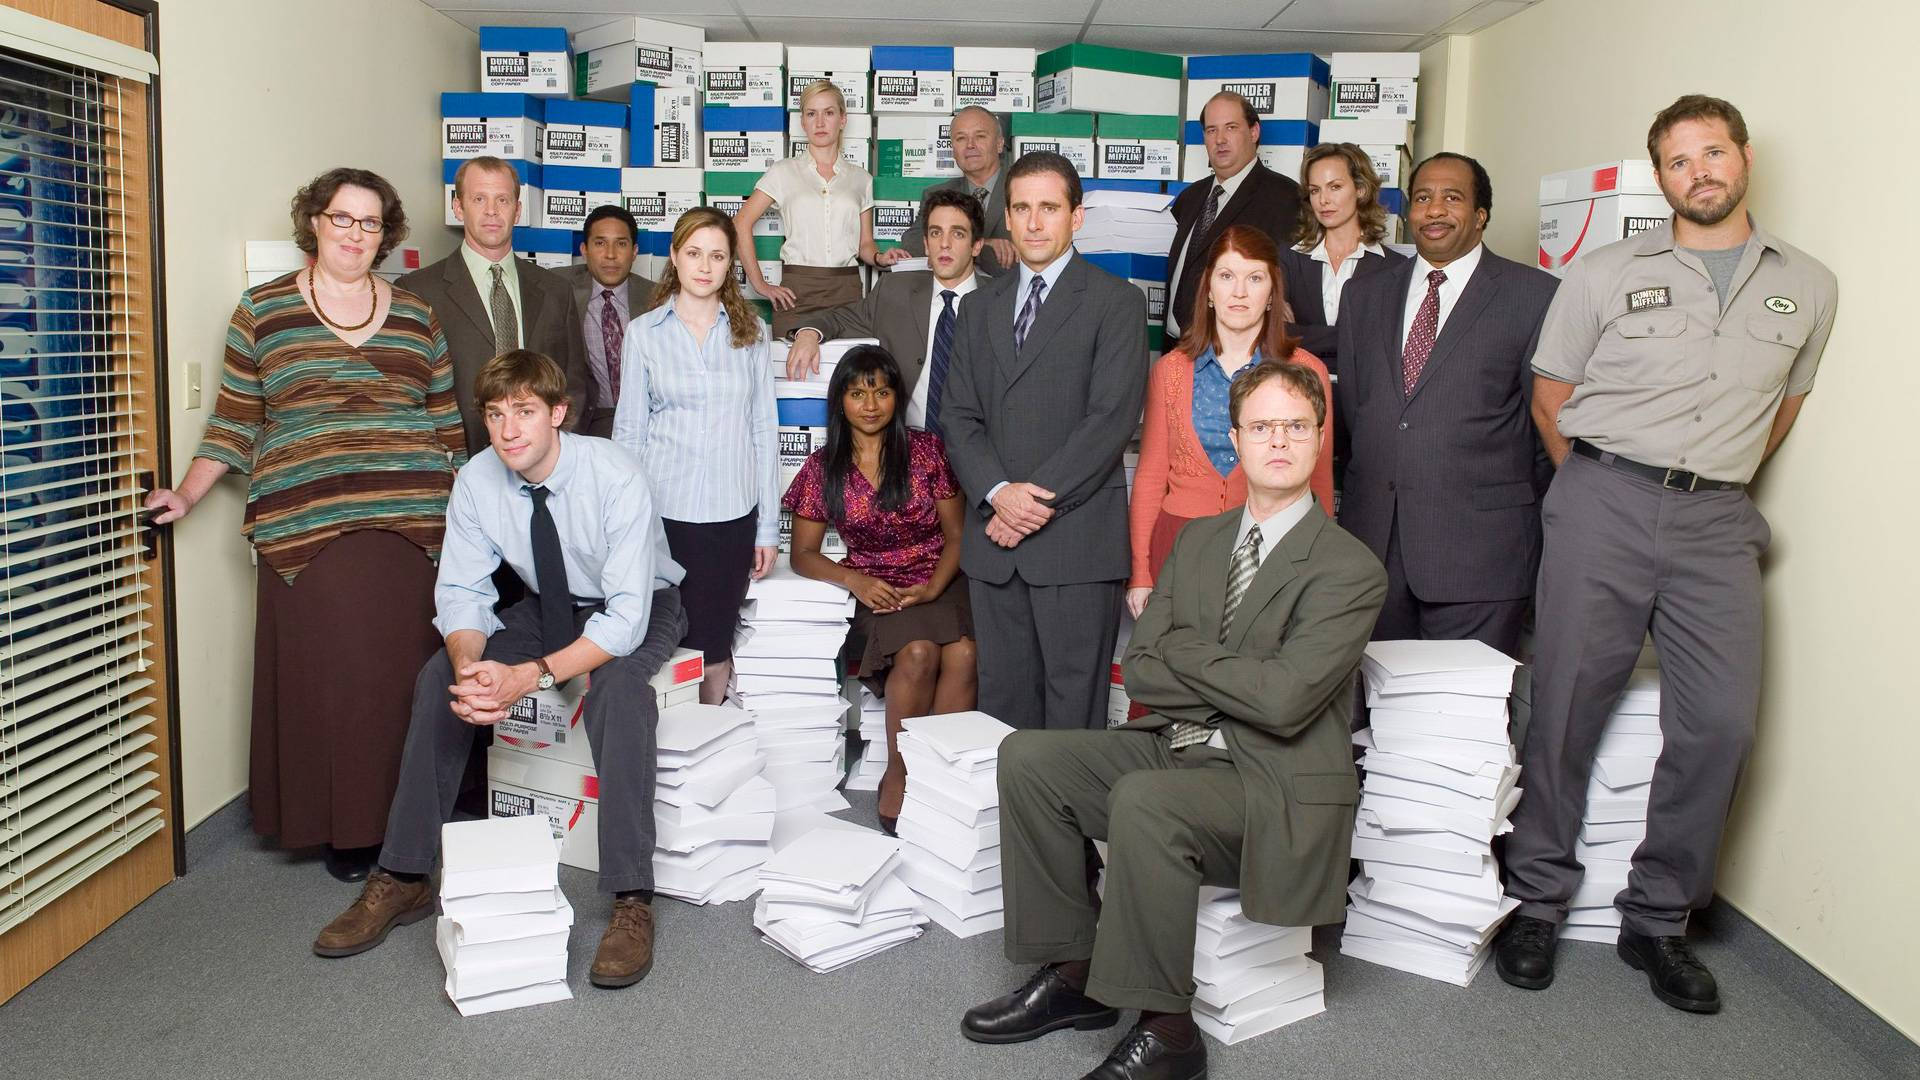 Trying to stay organized with the cast of The Office in the Stockroom. Wallpaper